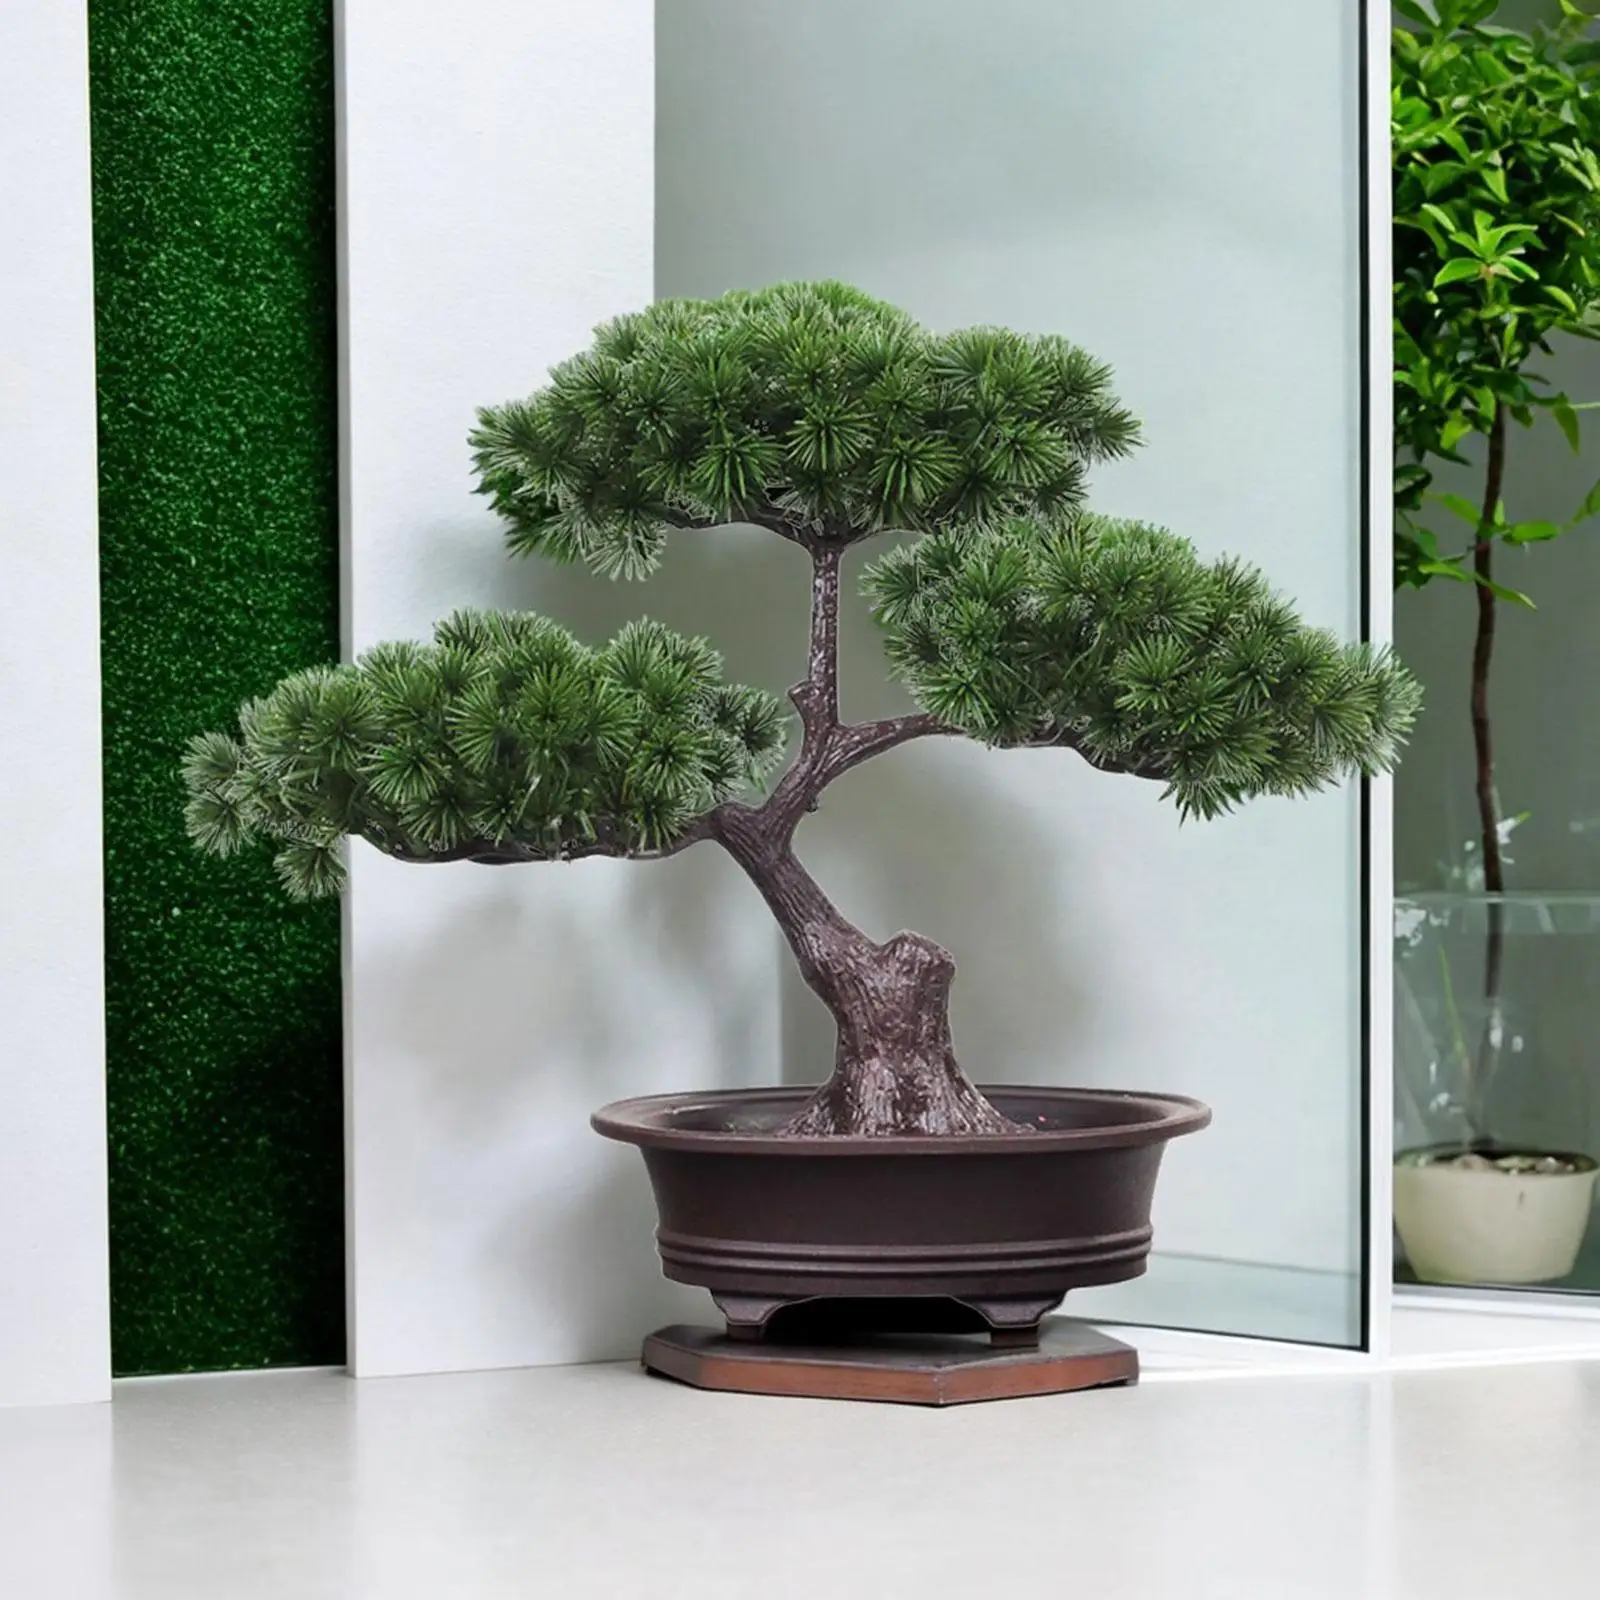 Simulation Tree Potted Plant Artificial Green Plant Realistic Durable Desk Display Multifunctional for Terrace Windowsill